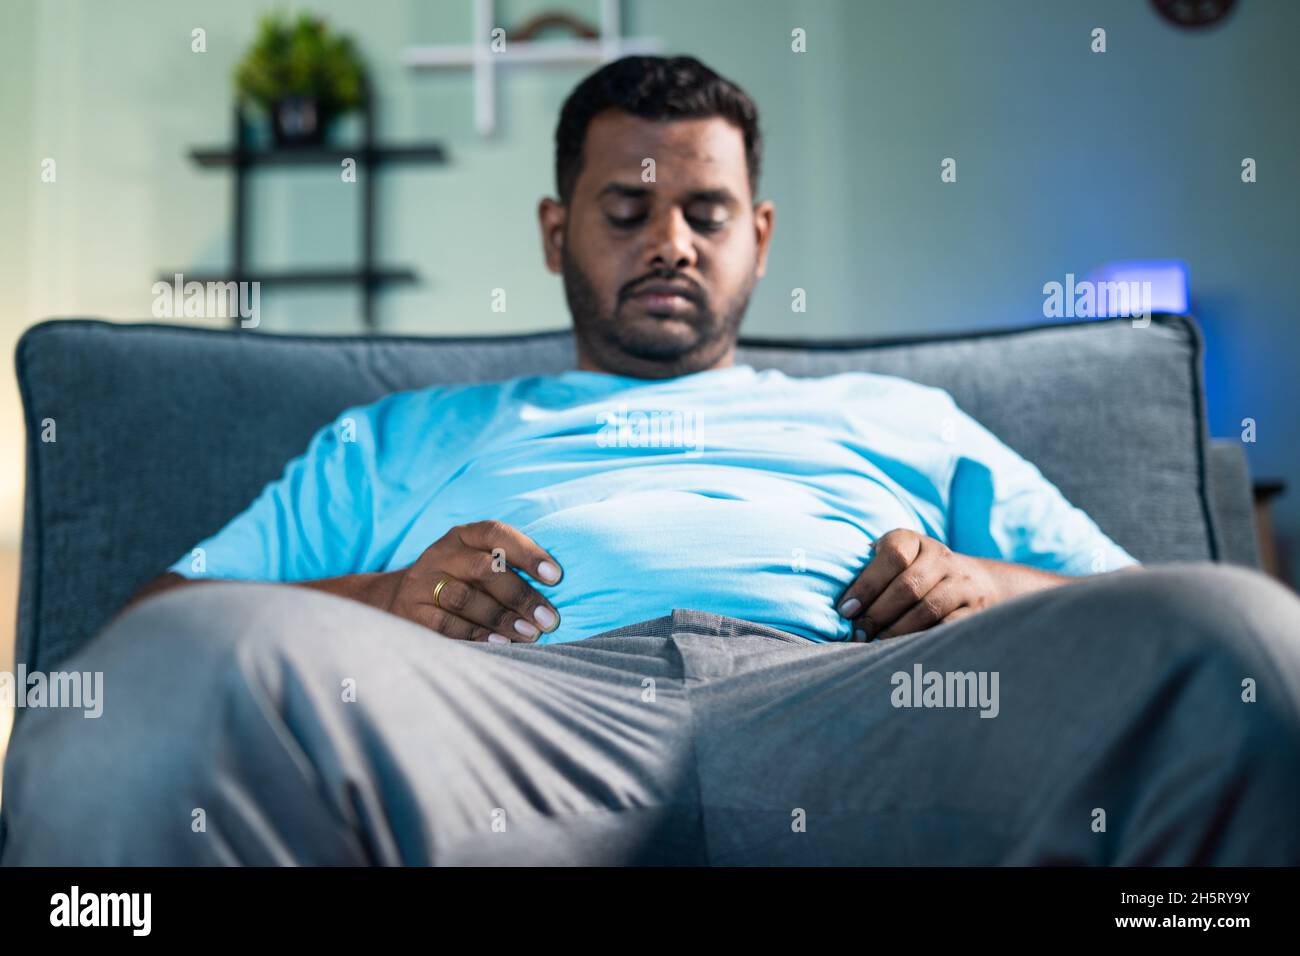 Sad obase man disappointed for heavy belly fat by holding hands while sitting on sofa at home - Concept of overweight, desease, suffering from excess Stock Photo